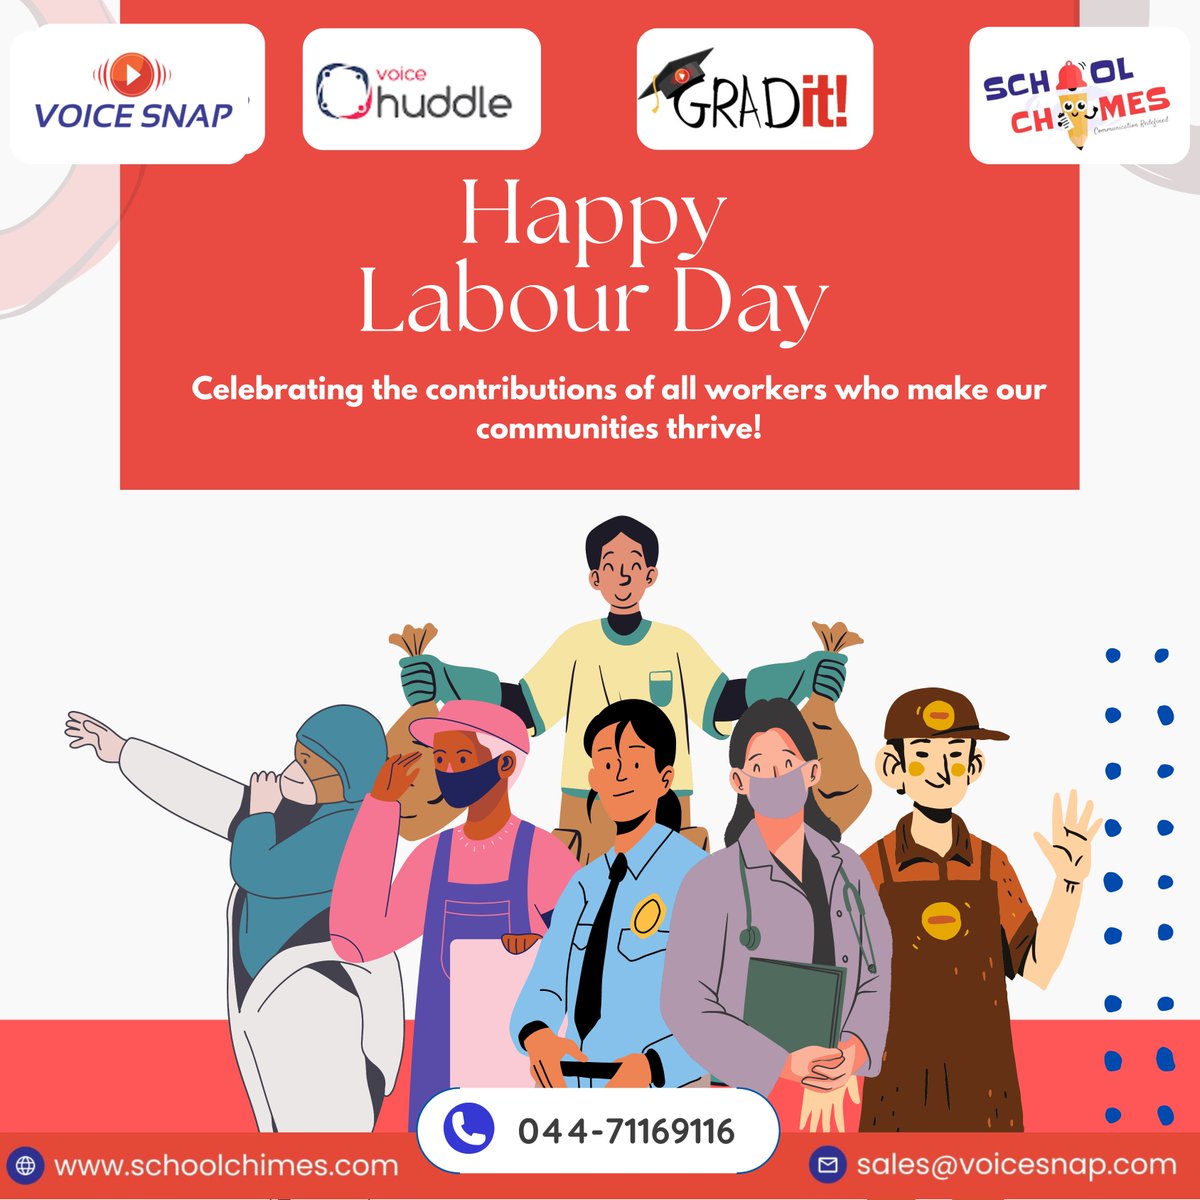 Today, we celebrate the dedication of all workers who make our communities strong!

Visit ➡️ Schoolchimes.com

#EffortlessSchools #HappyLaborDay #Schools #Edtech #Schooltech #Schoolsoftware